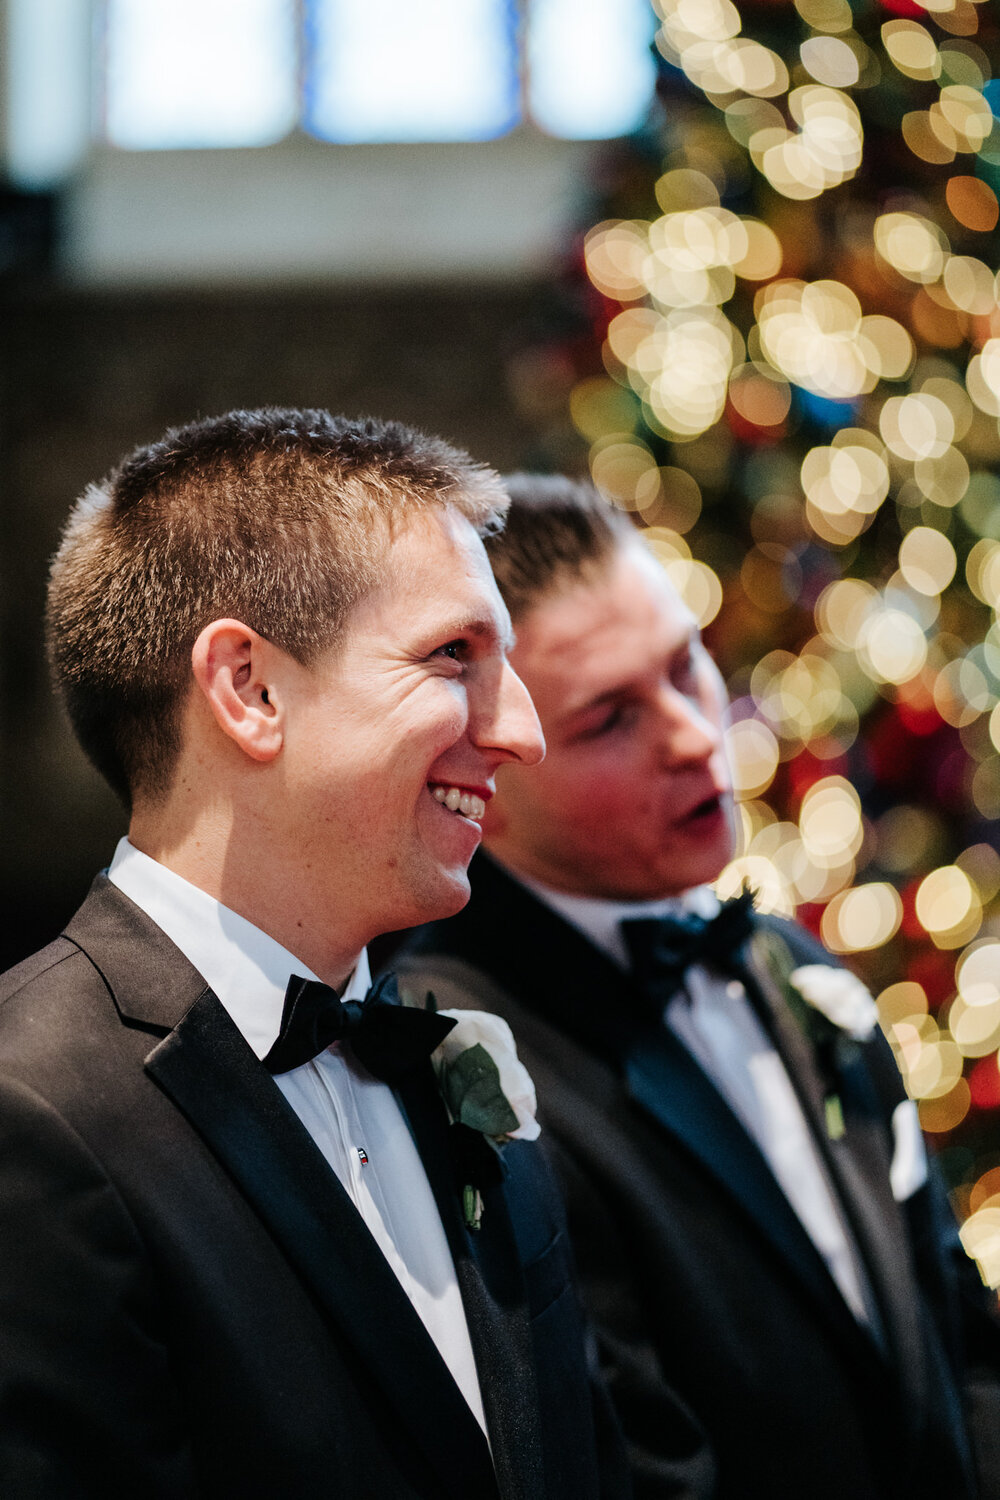 Groom and his best man react to seeing the bride walk down the aisle at St Paul's Knightsbridge London wedding